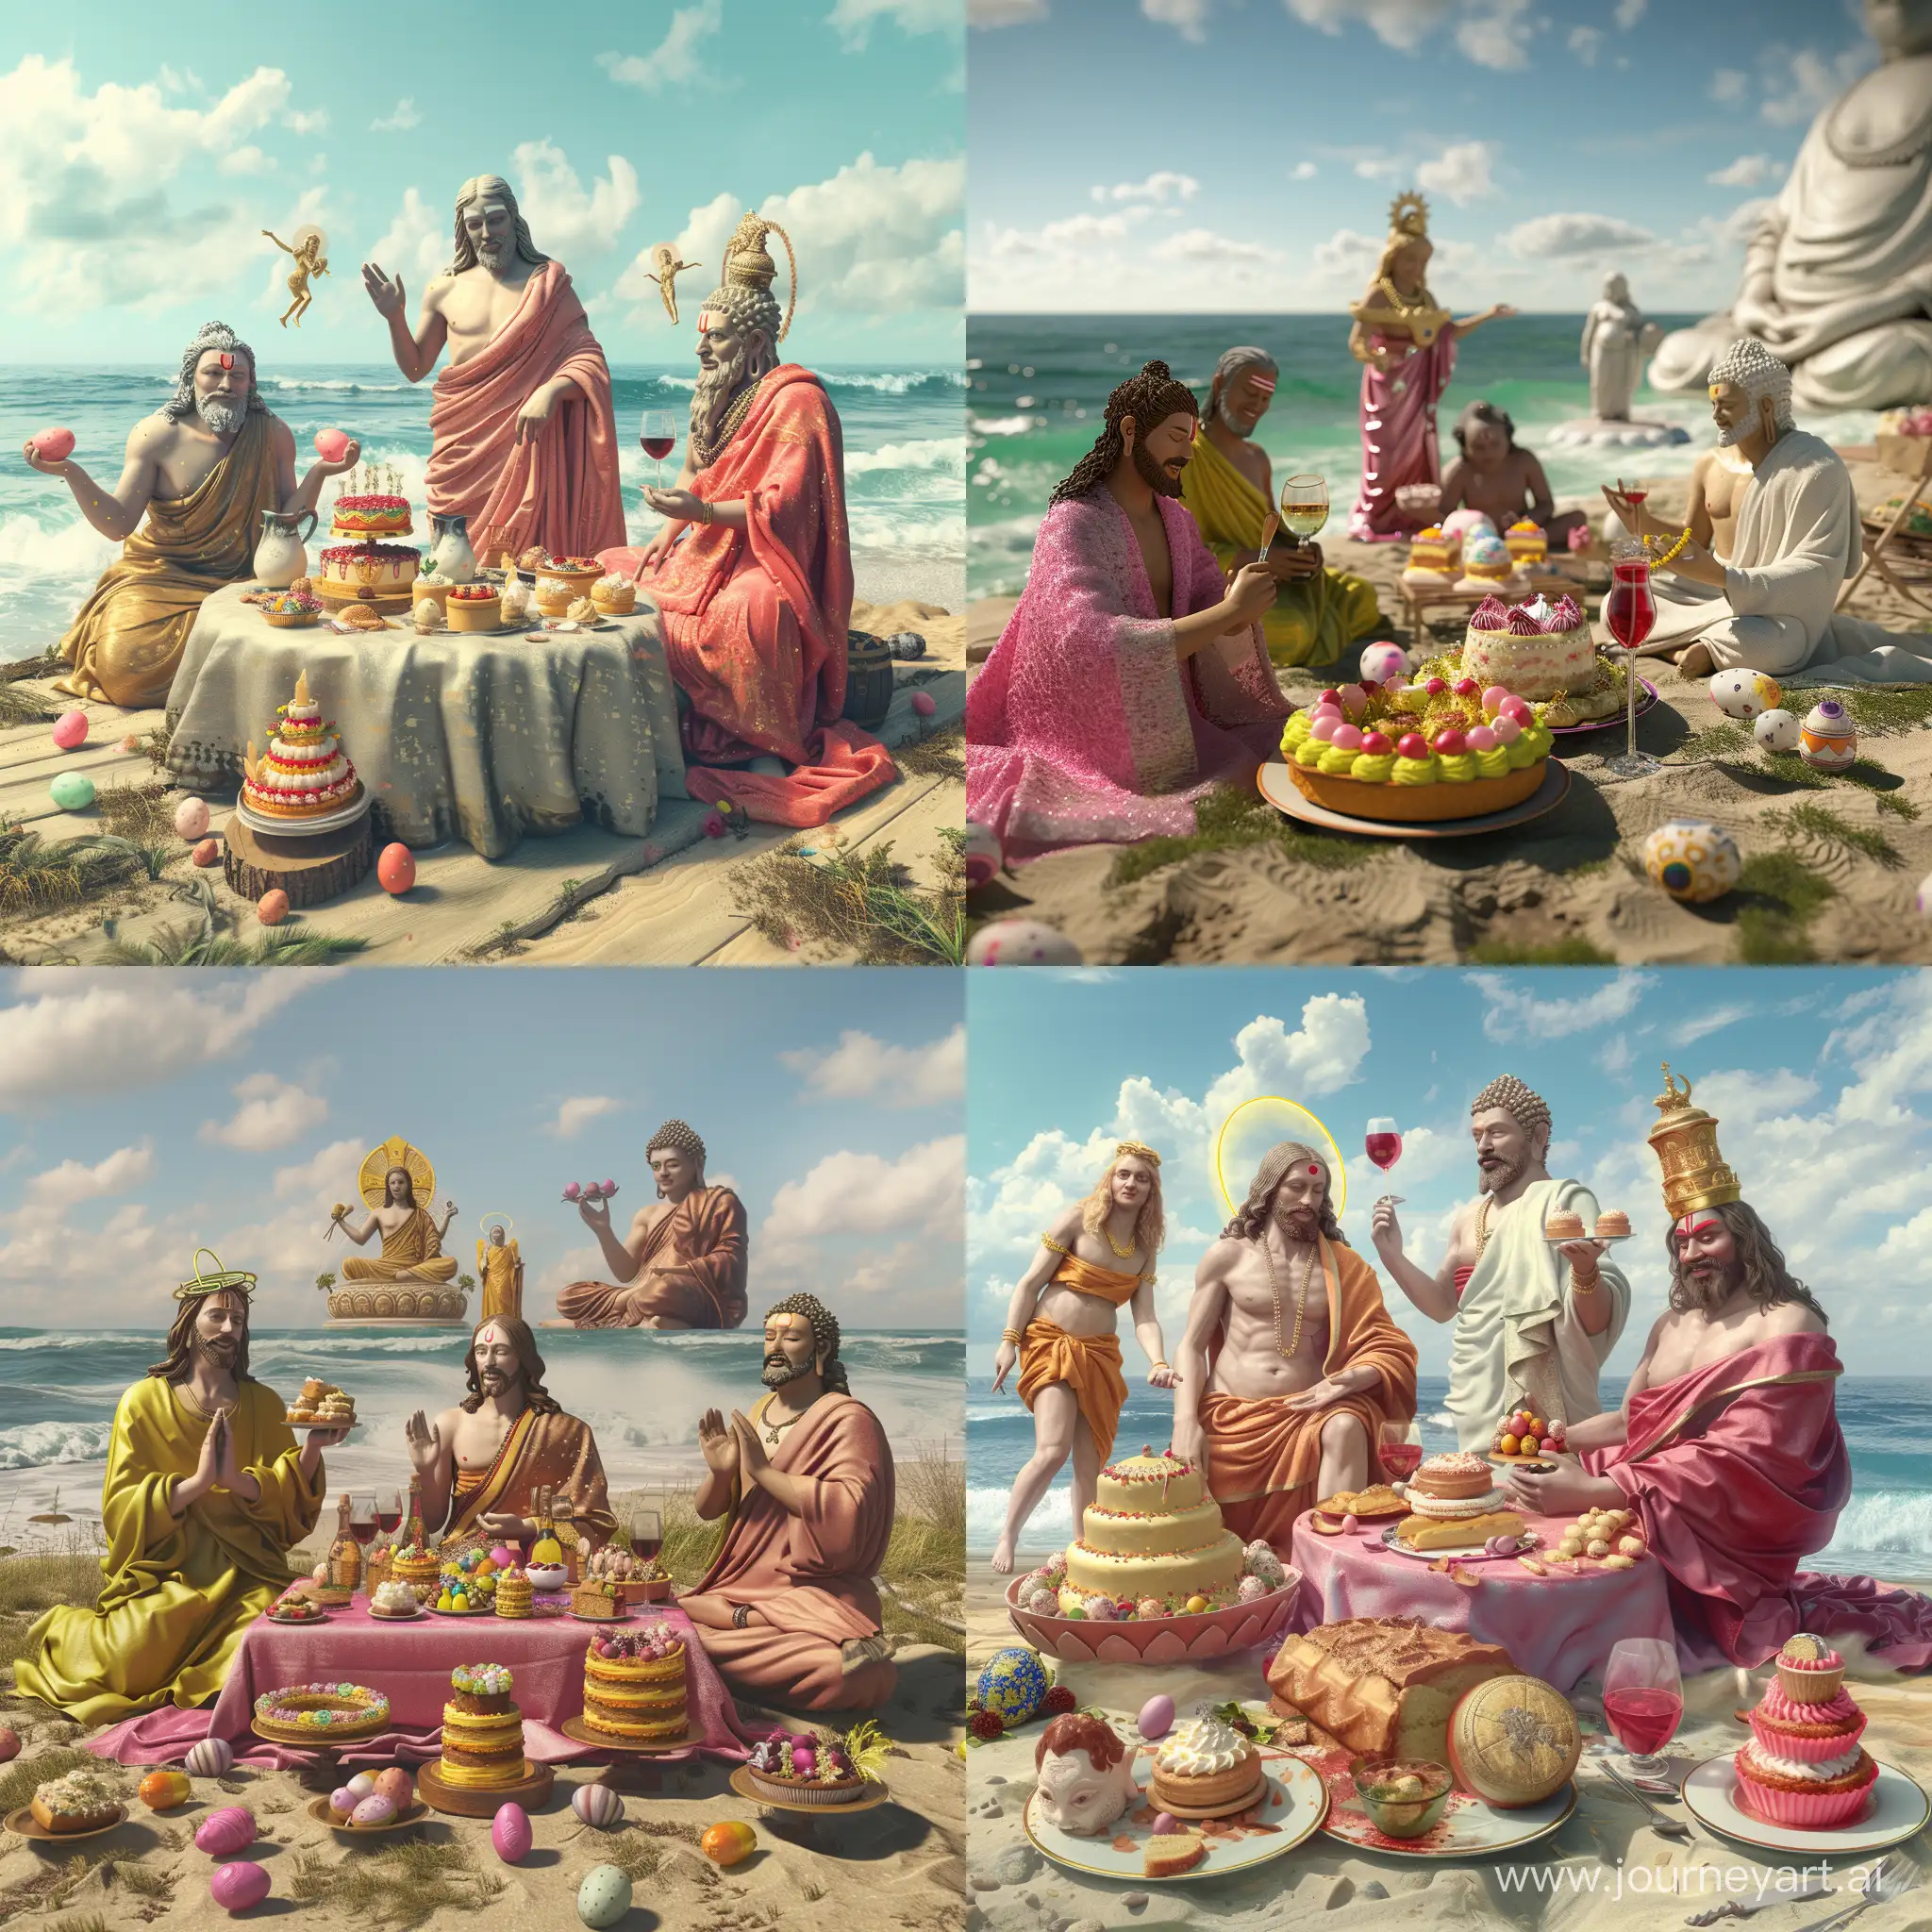 Divine-Figures-Enjoy-Picnic-by-the-Beach-with-Easter-Cakes-and-Wine